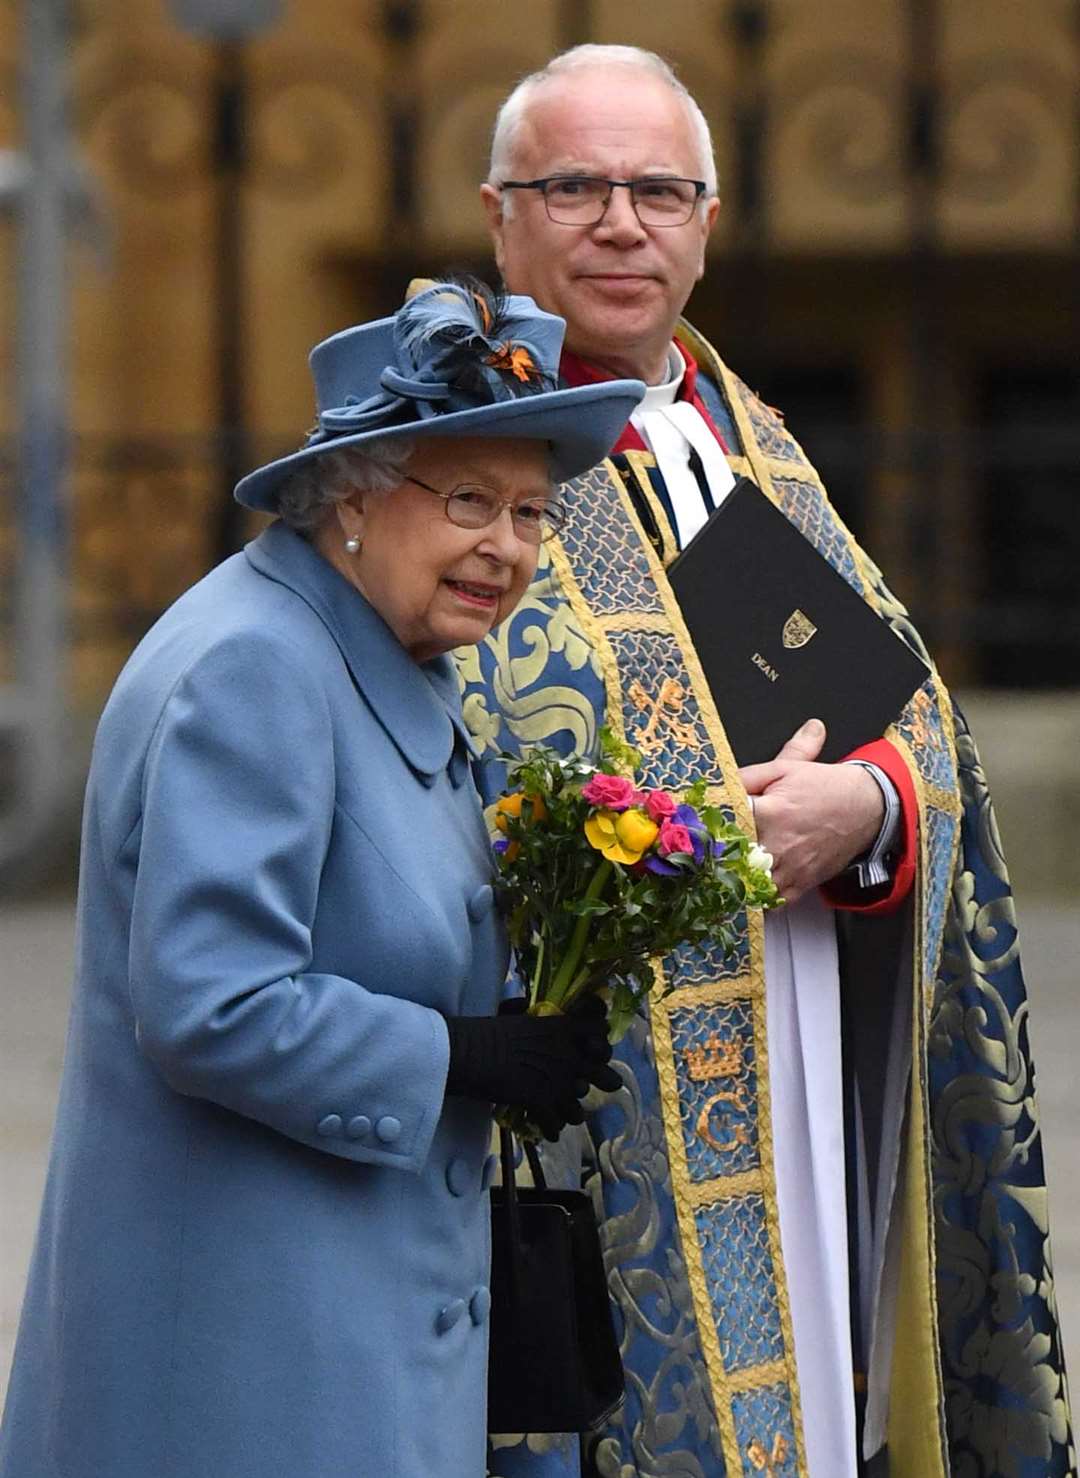 The Queen leaving Westminster Abbey after attending the Commonwealth Service in early March before the lockdown (Dominic Lipinski/PA)